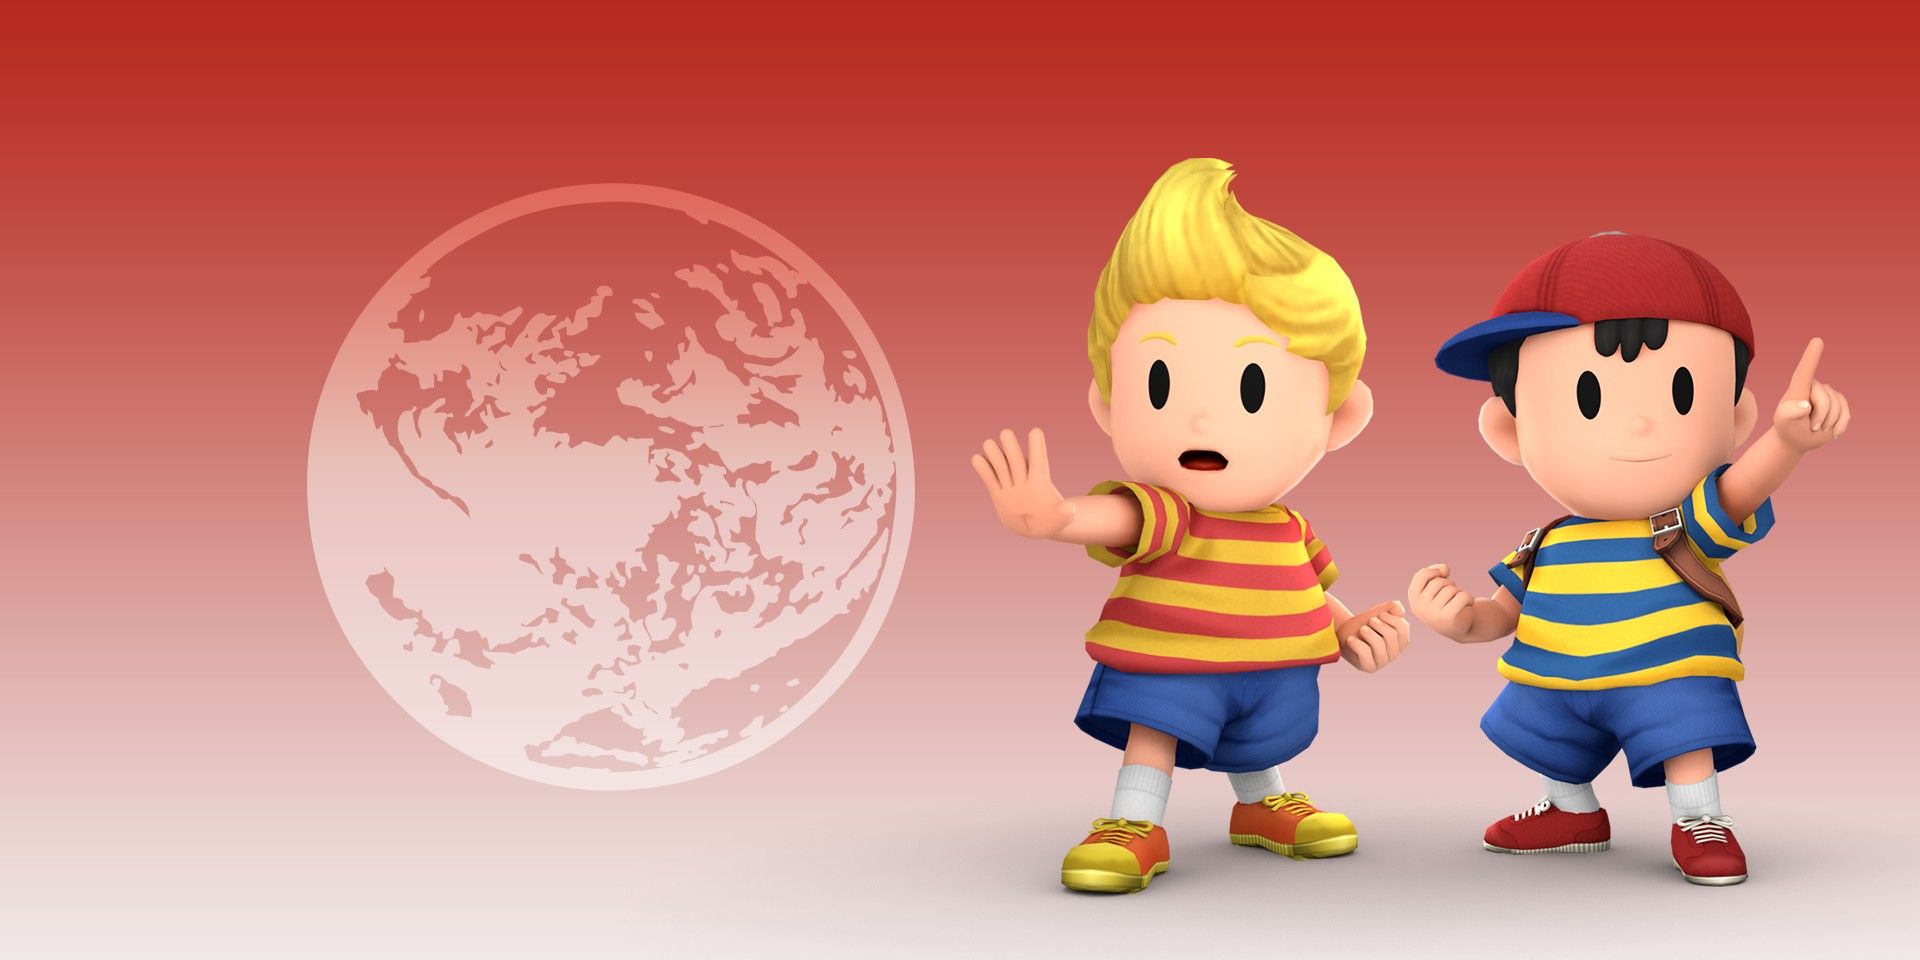 Earthbound's Lucas and Ness